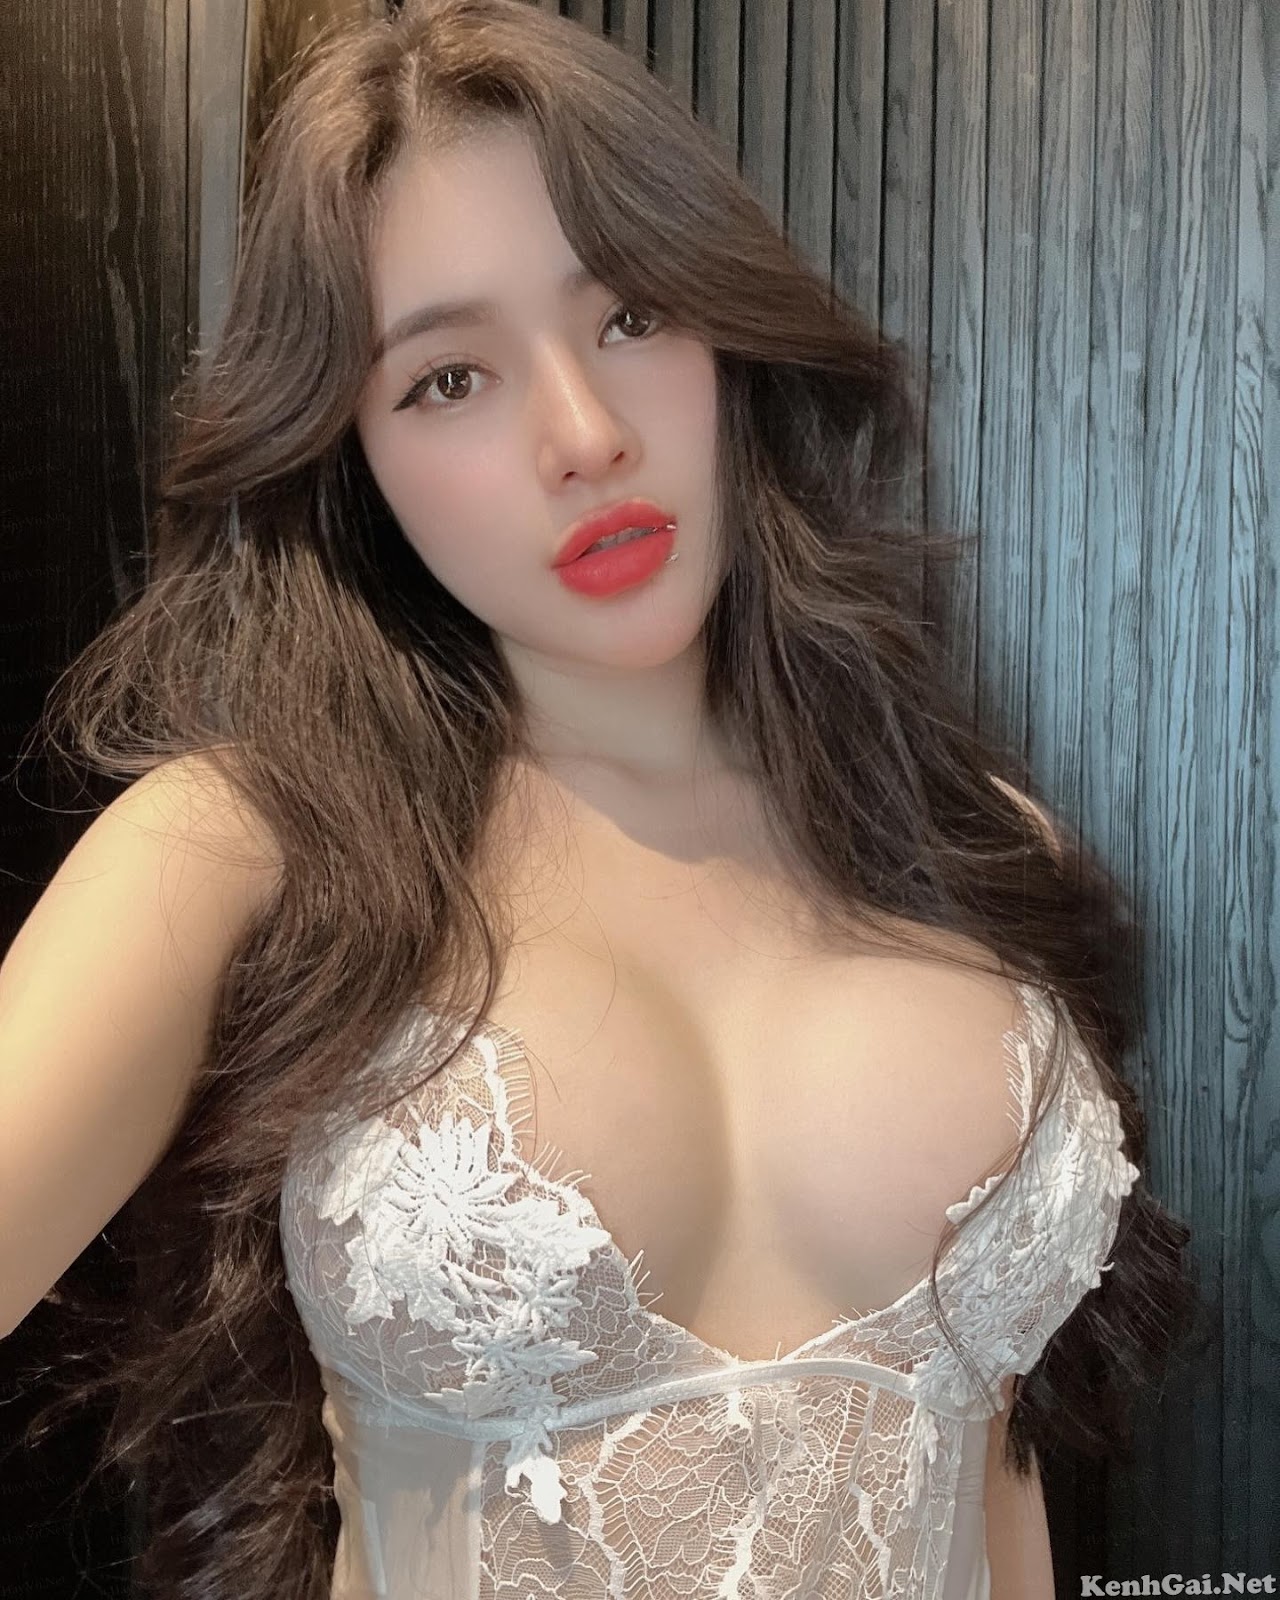 hayvnnet linh sully chat nhu nuoc cat %20%2858%29